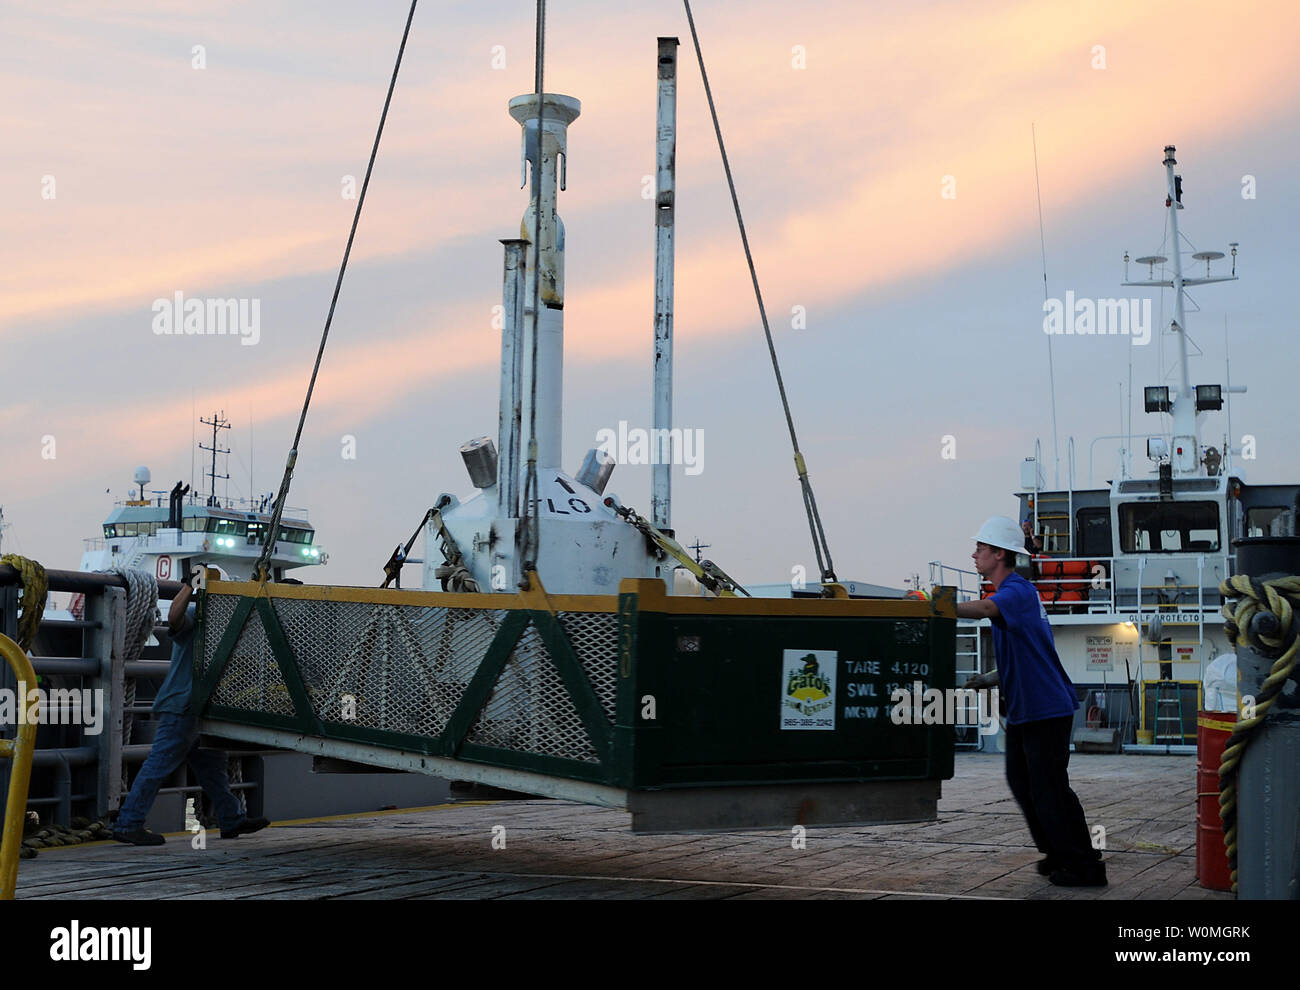 A small pollution containment chamber, known as the top hat, is loaded onto the deck of the motor vessel Gulf Protector at Wild Well Control Inc. in Port Fourchon, Louisiana on May 10, 2010.  The chamber will be used in an attempt to contain an oil leak that was caused by the mobile offshore drilling unit Deepwater Horizon explosion.    UPI/Patrick Kelley/U.S. Coast Guard Stock Photo